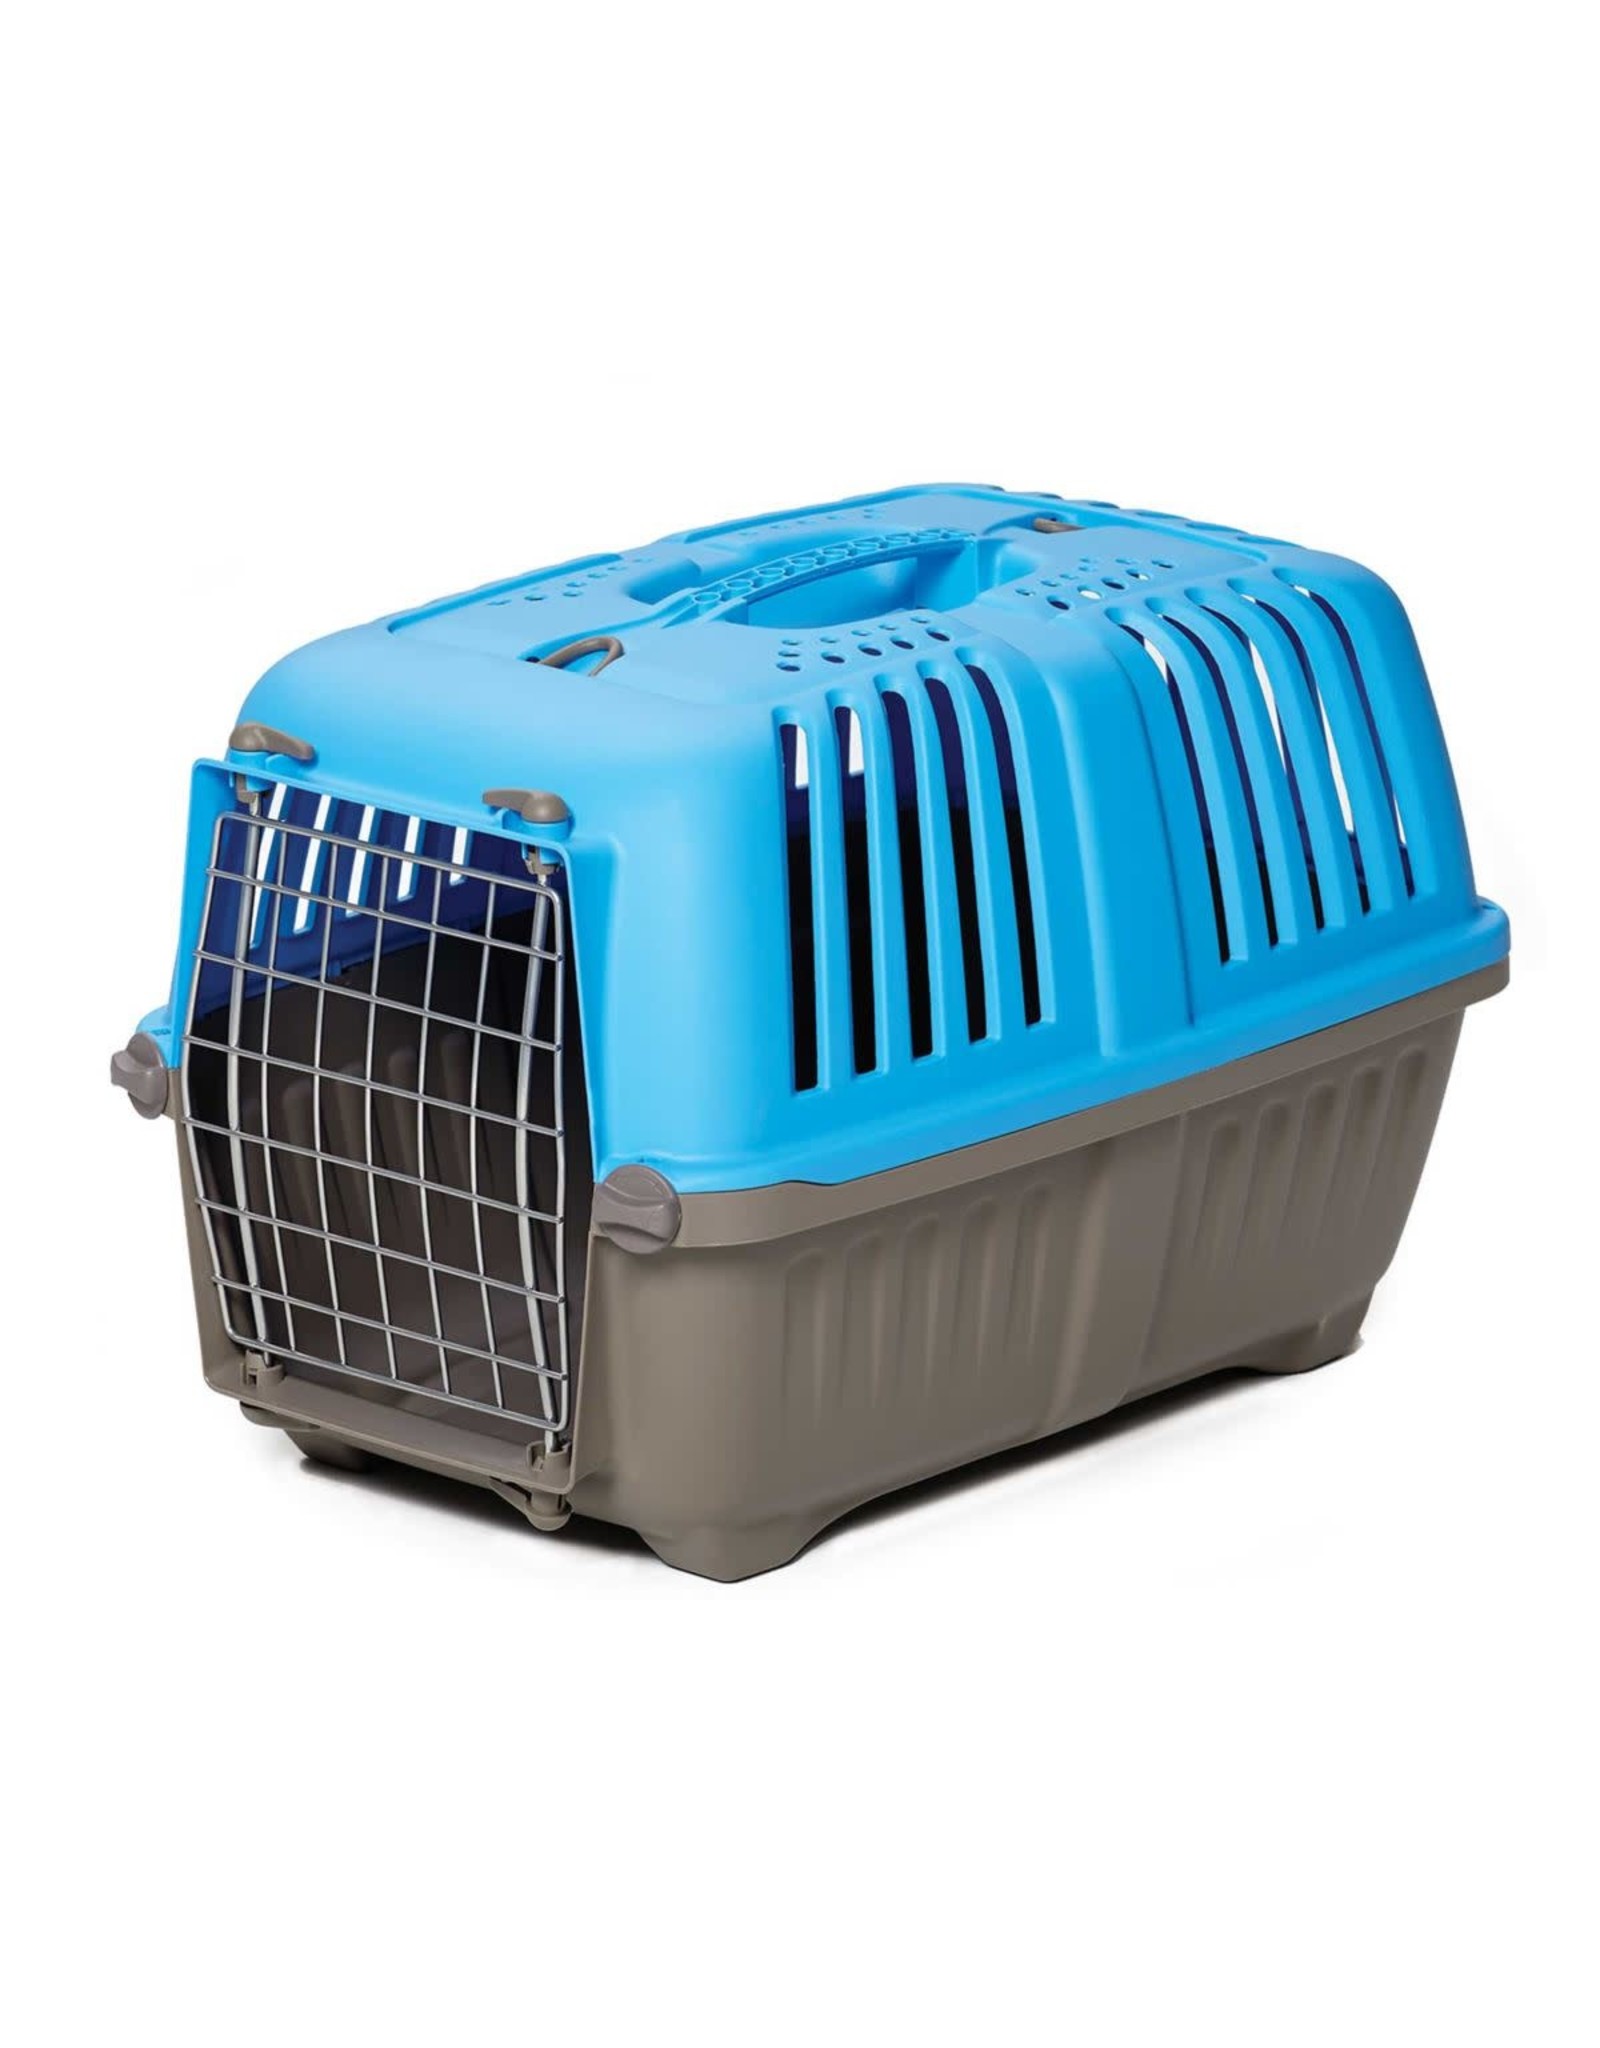 MidWest Homes for Pets MidWest Spree Pet Carrier